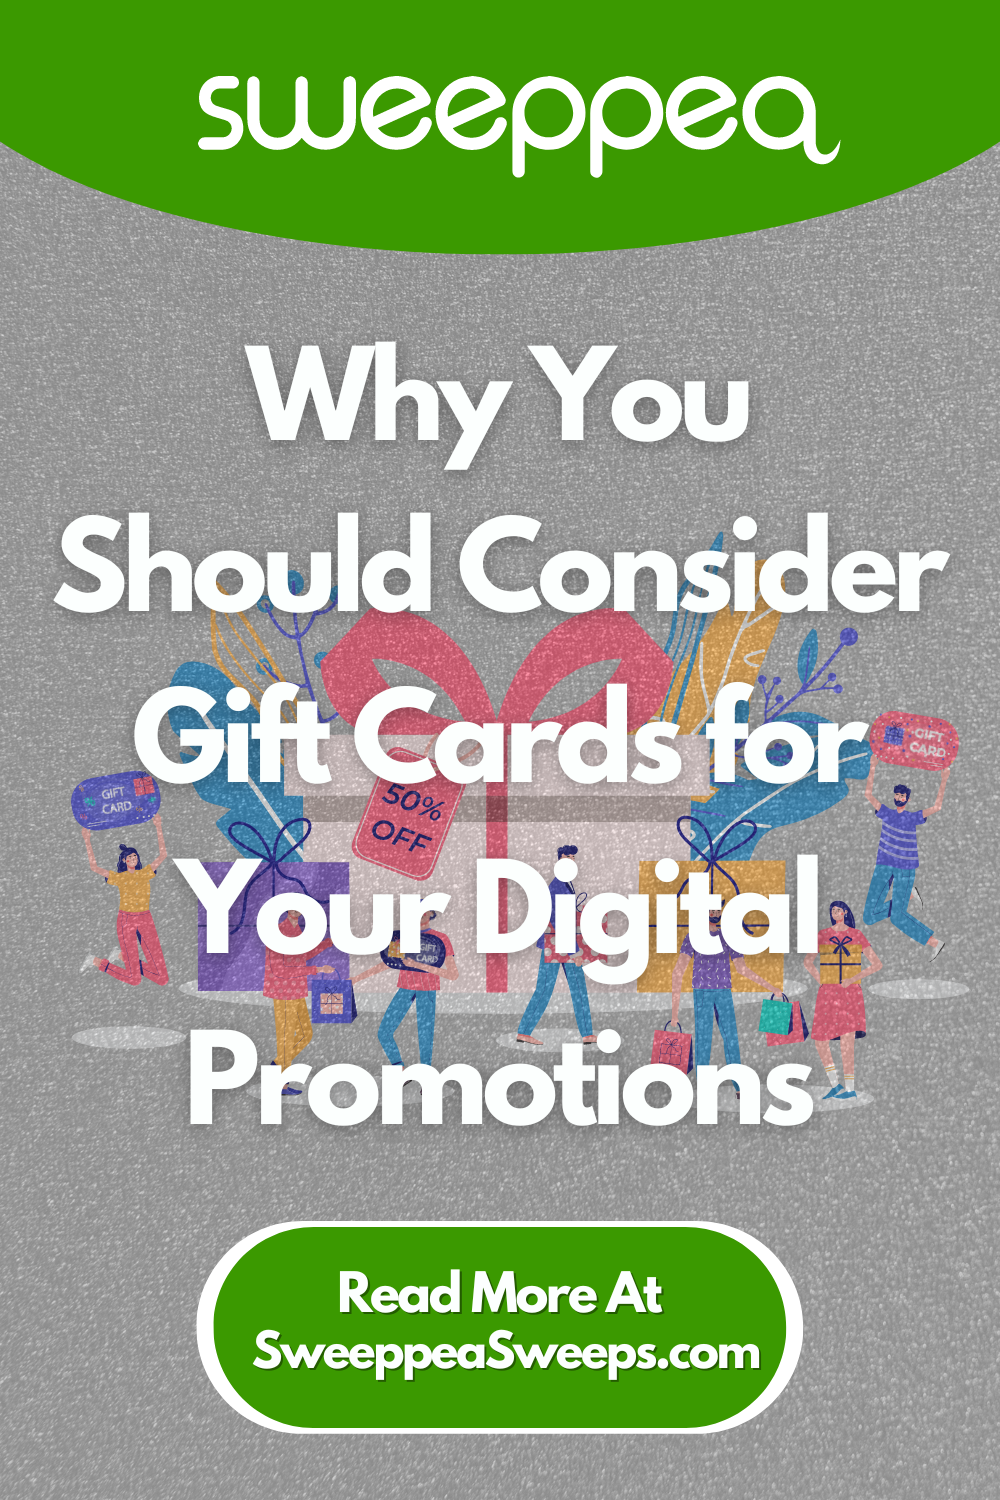 Why You Should Consider Gift Cards for Your Digital Promotions